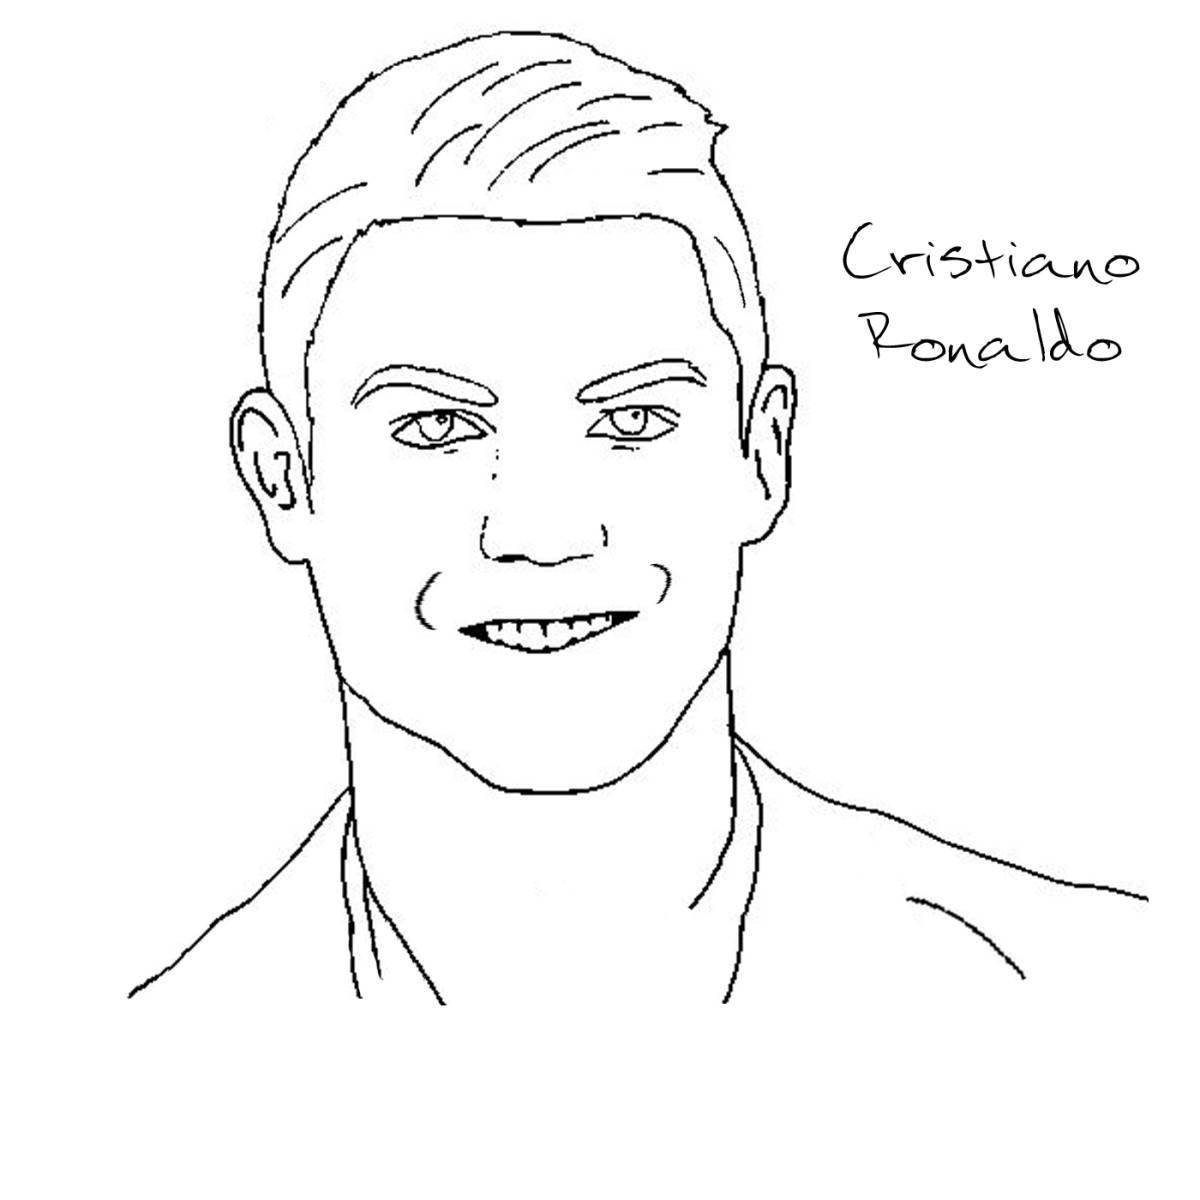 Ronaldo's dramatic face coloring page